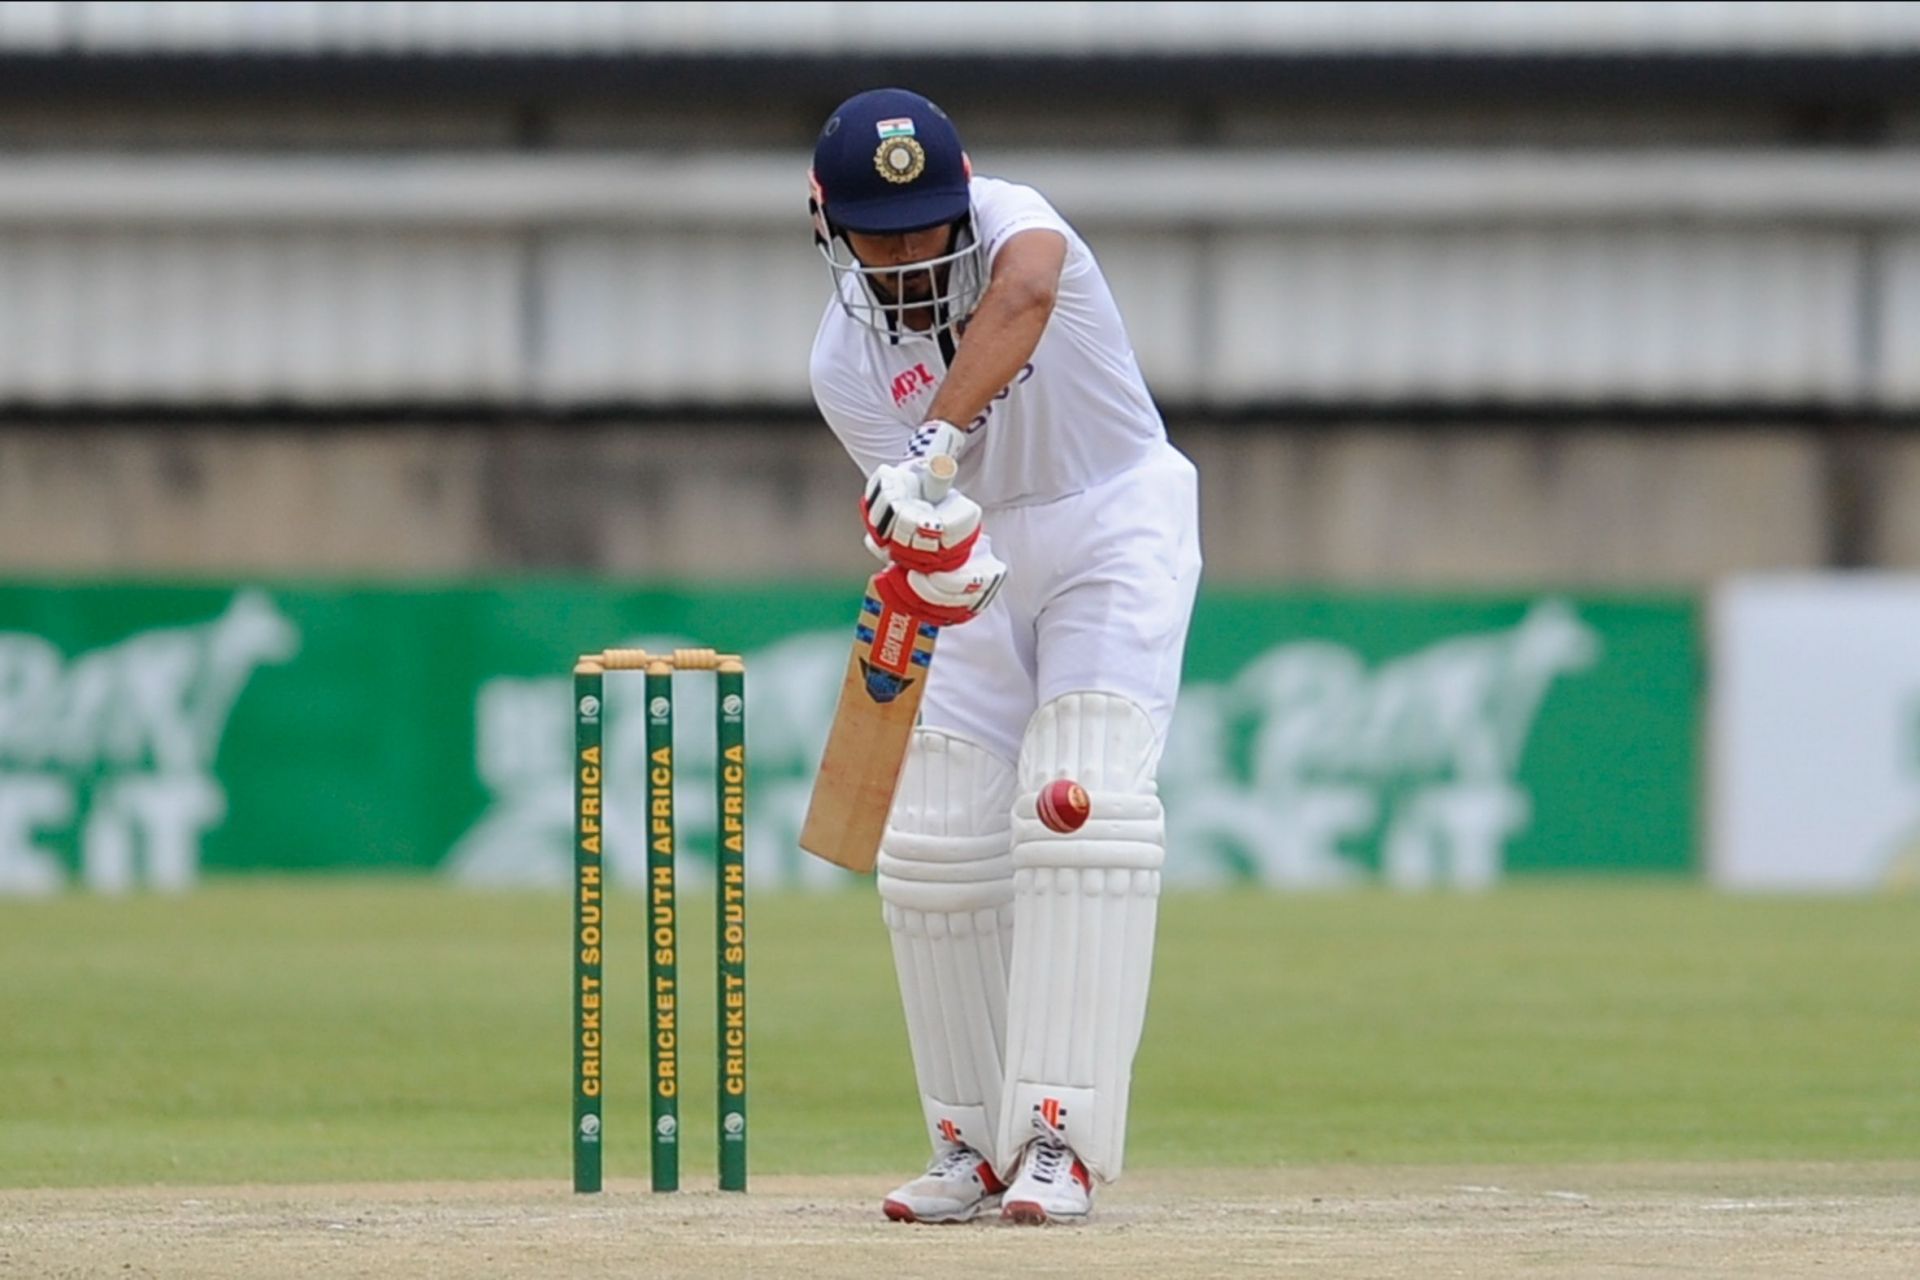 Priyank Panchal was part of the Test series against South Africa A